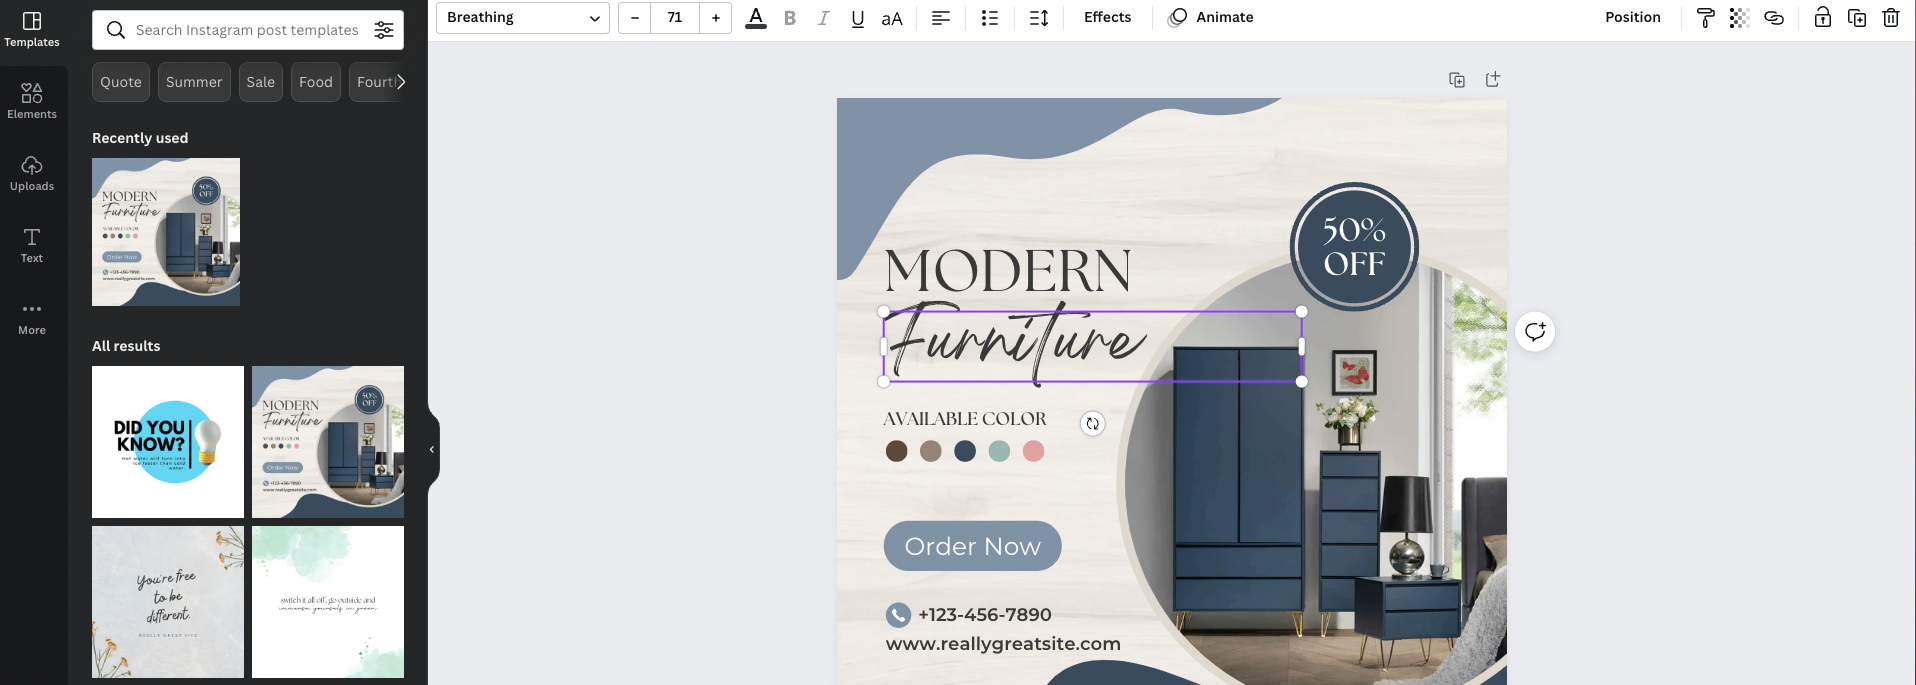 Screenshot of a premade editable template in the Canva platform